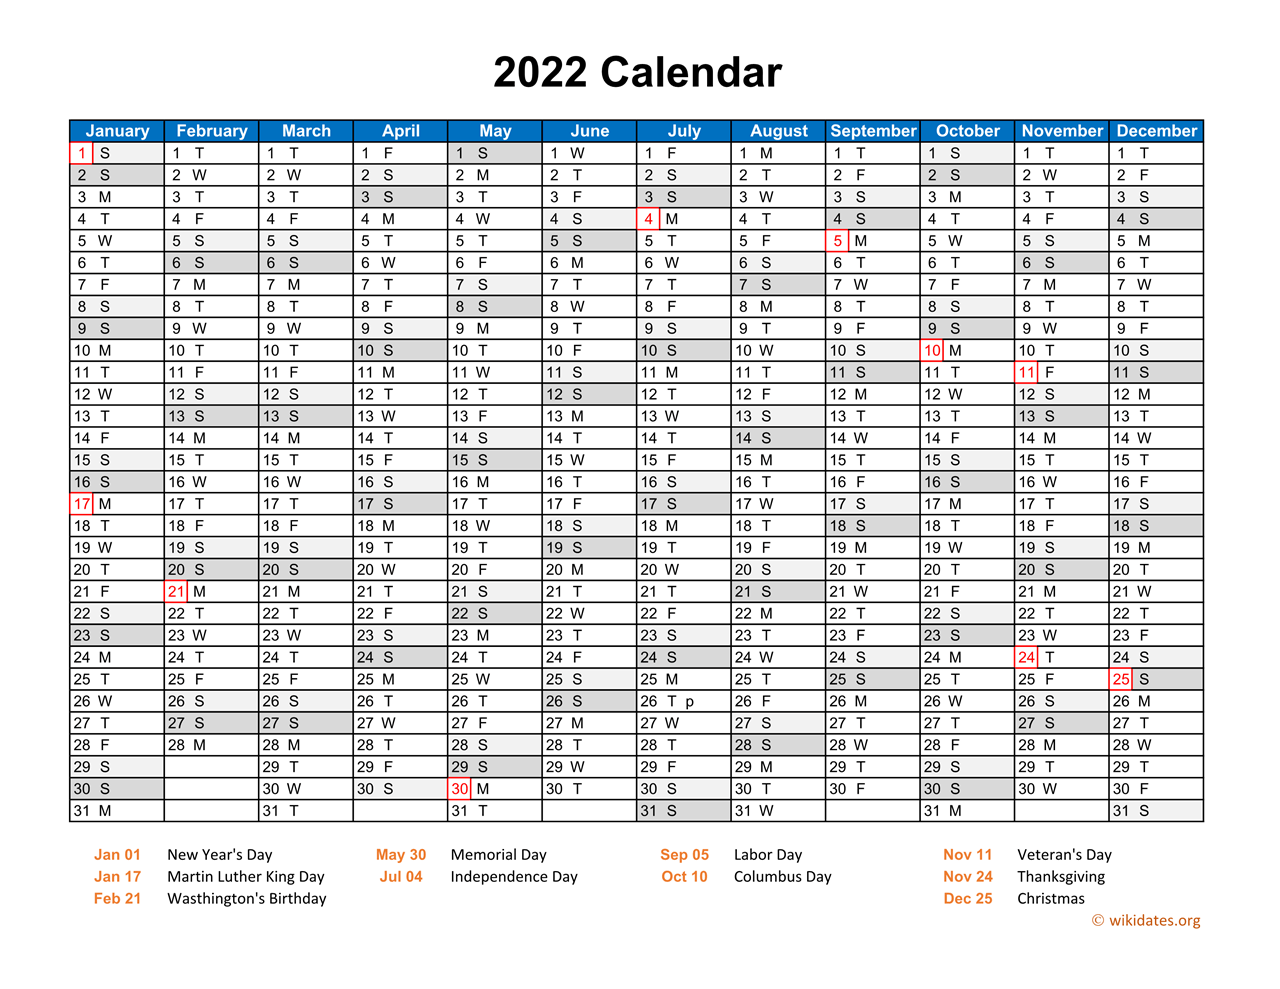 One Page Yearly Calendar 2022 2022 Calendar Horizontal, One Page | Wikidates.org